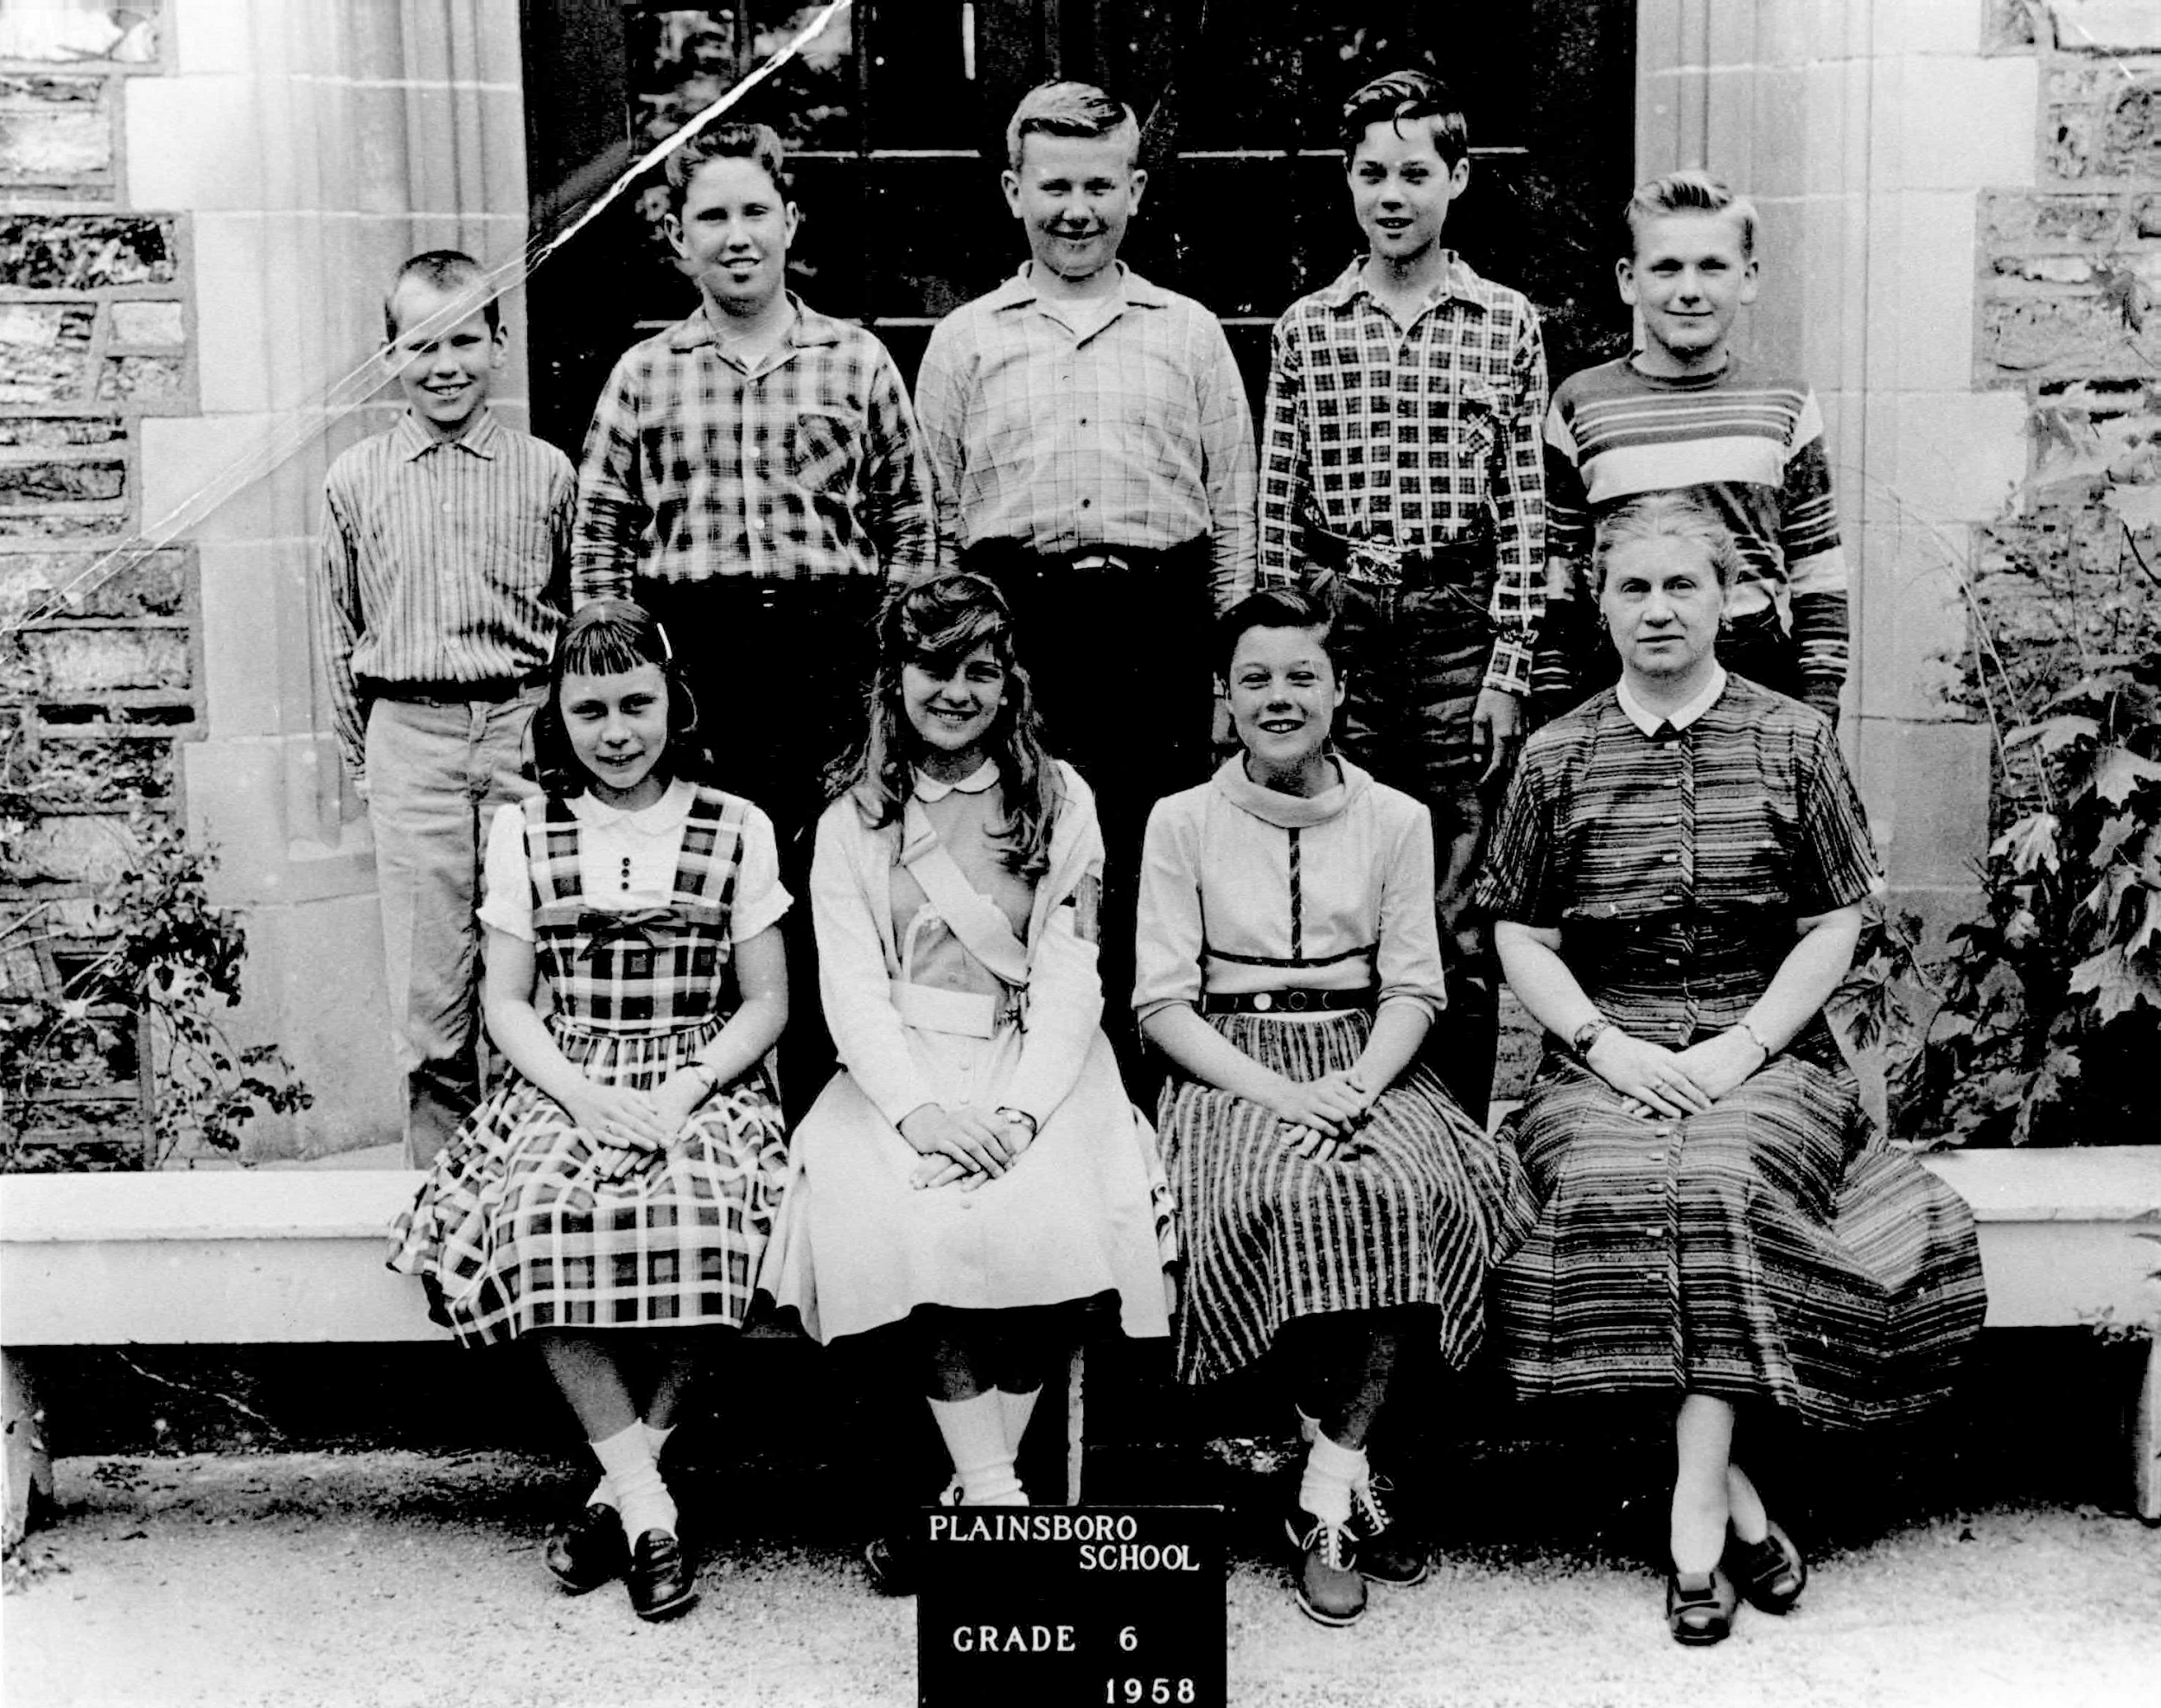 Annabelle Hawke with her 6th grade class, 1958. Front row: Pamela Stalcup, Victoria Sterling, Ruth Stalcup, Annabelle Hawke. Back row: Buster Simonson, Bob Watlington, George Weeks, Richard Stalcup, Harold Britton.